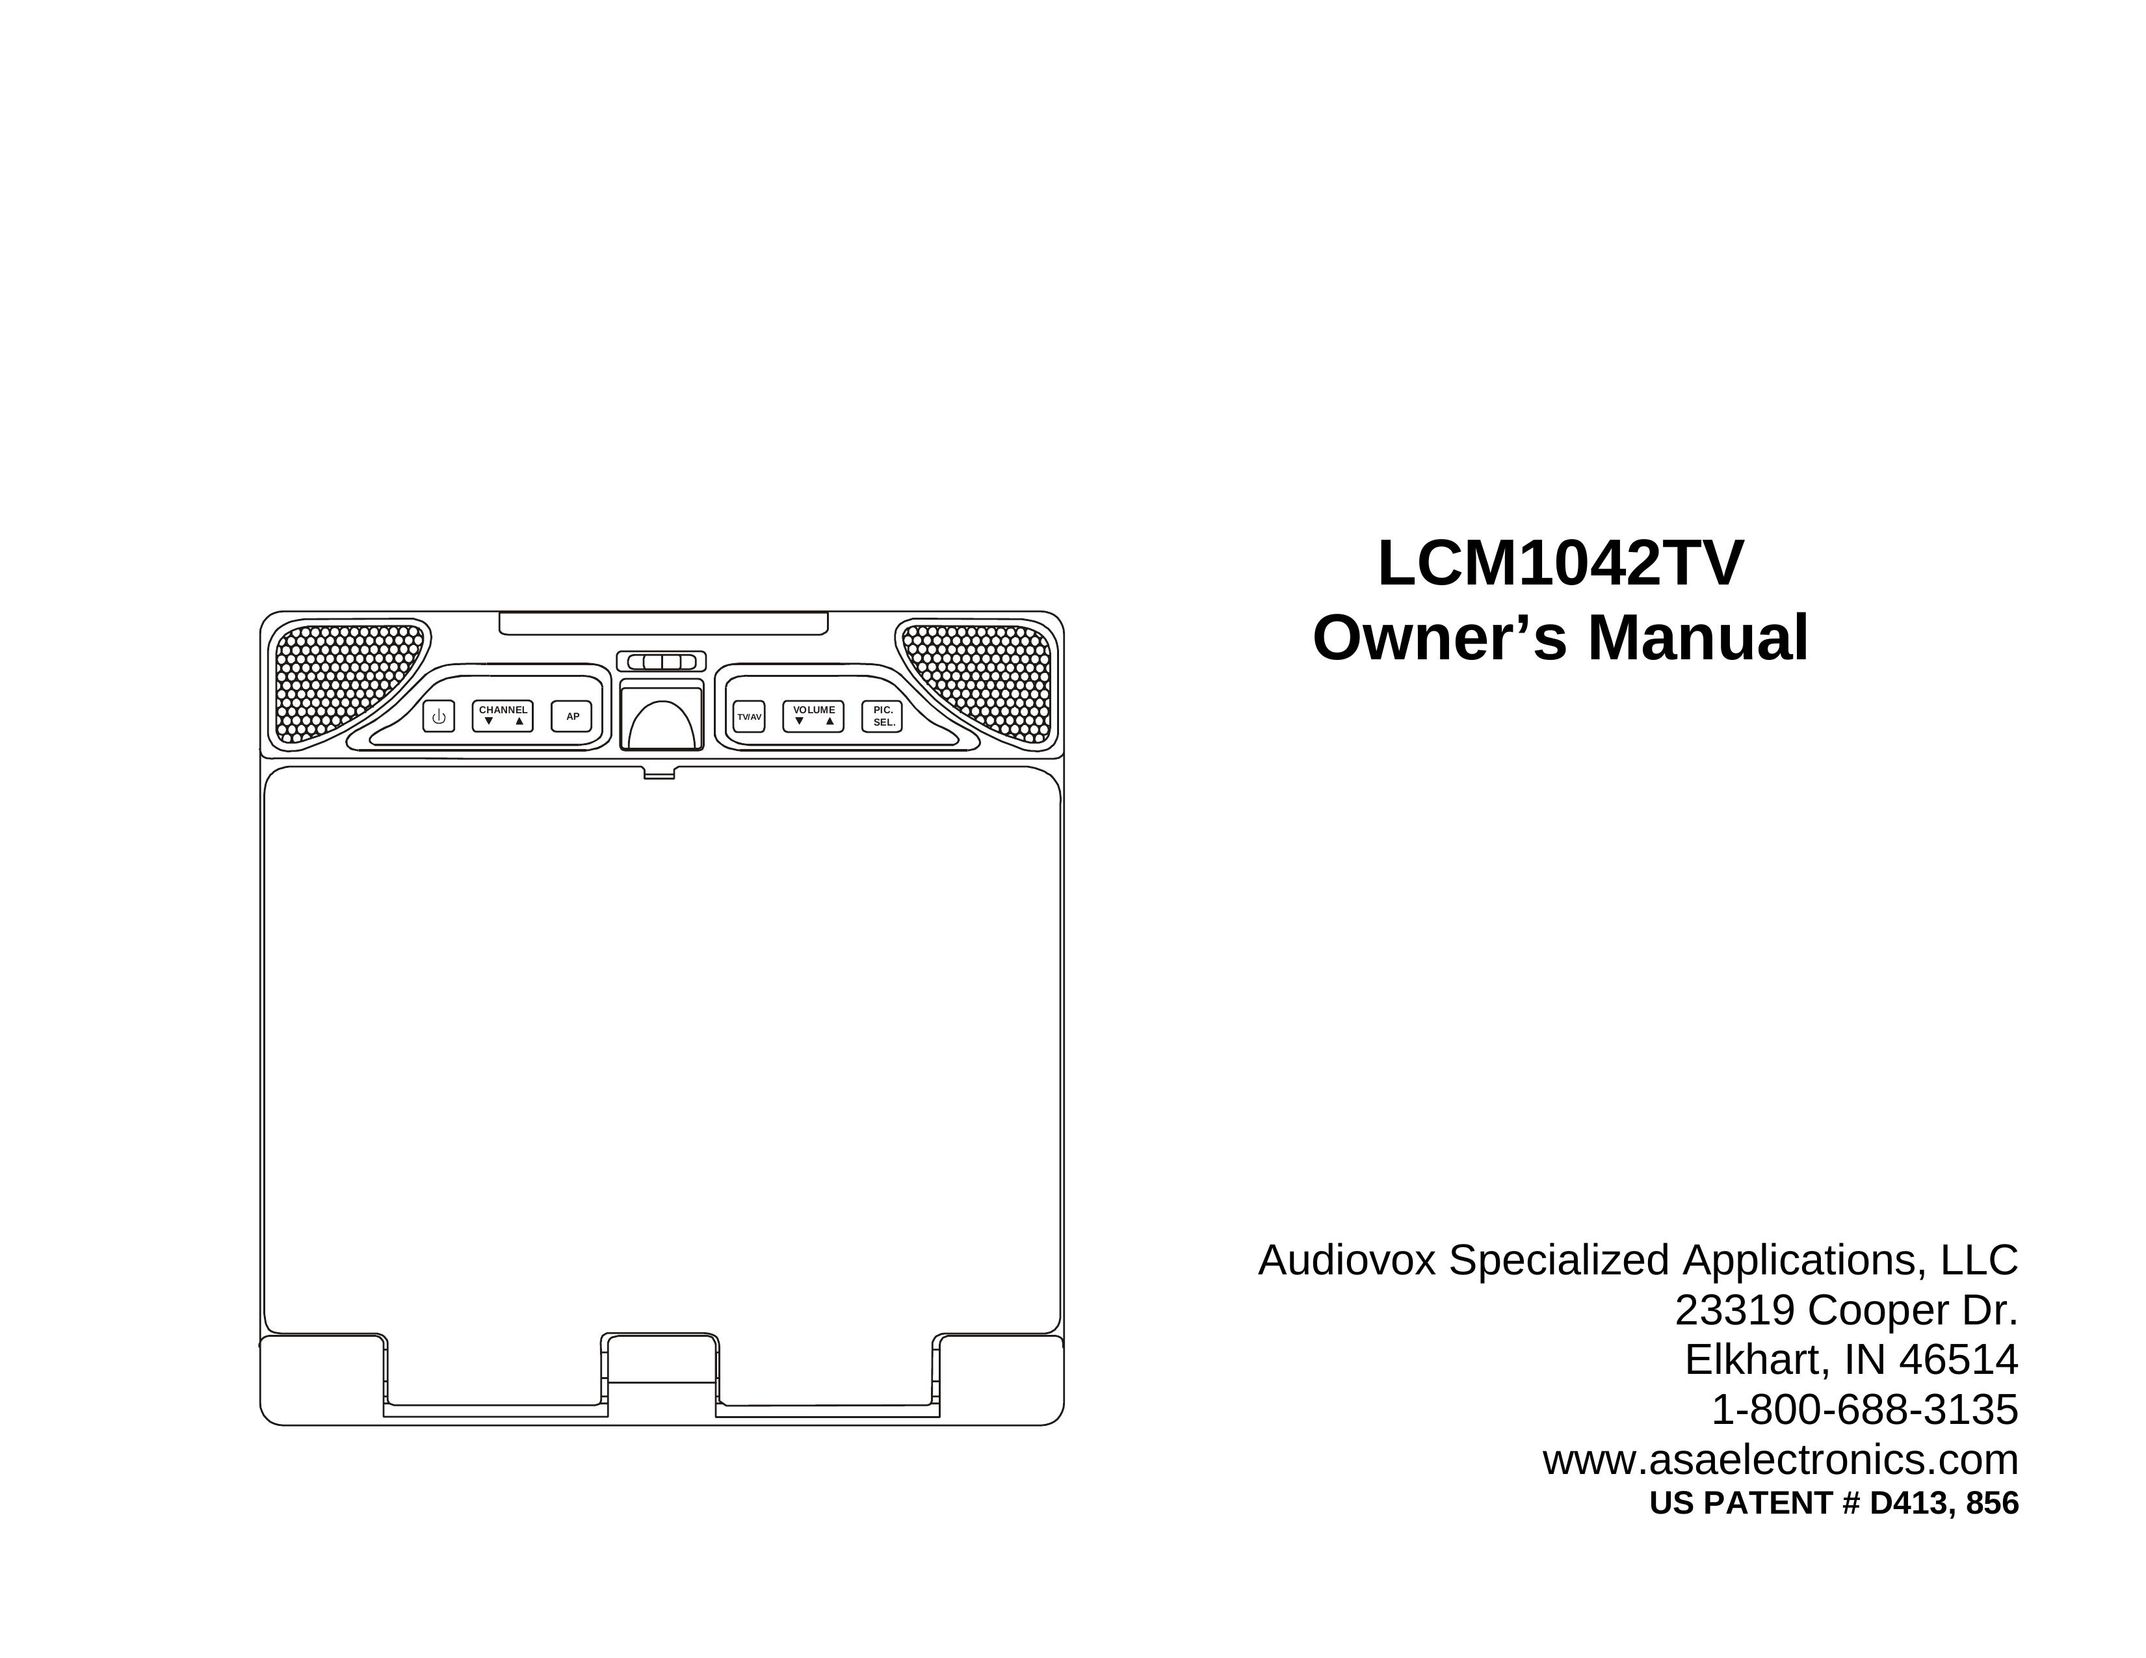 ASA Electronics LCM1042TV Projection Television User Manual